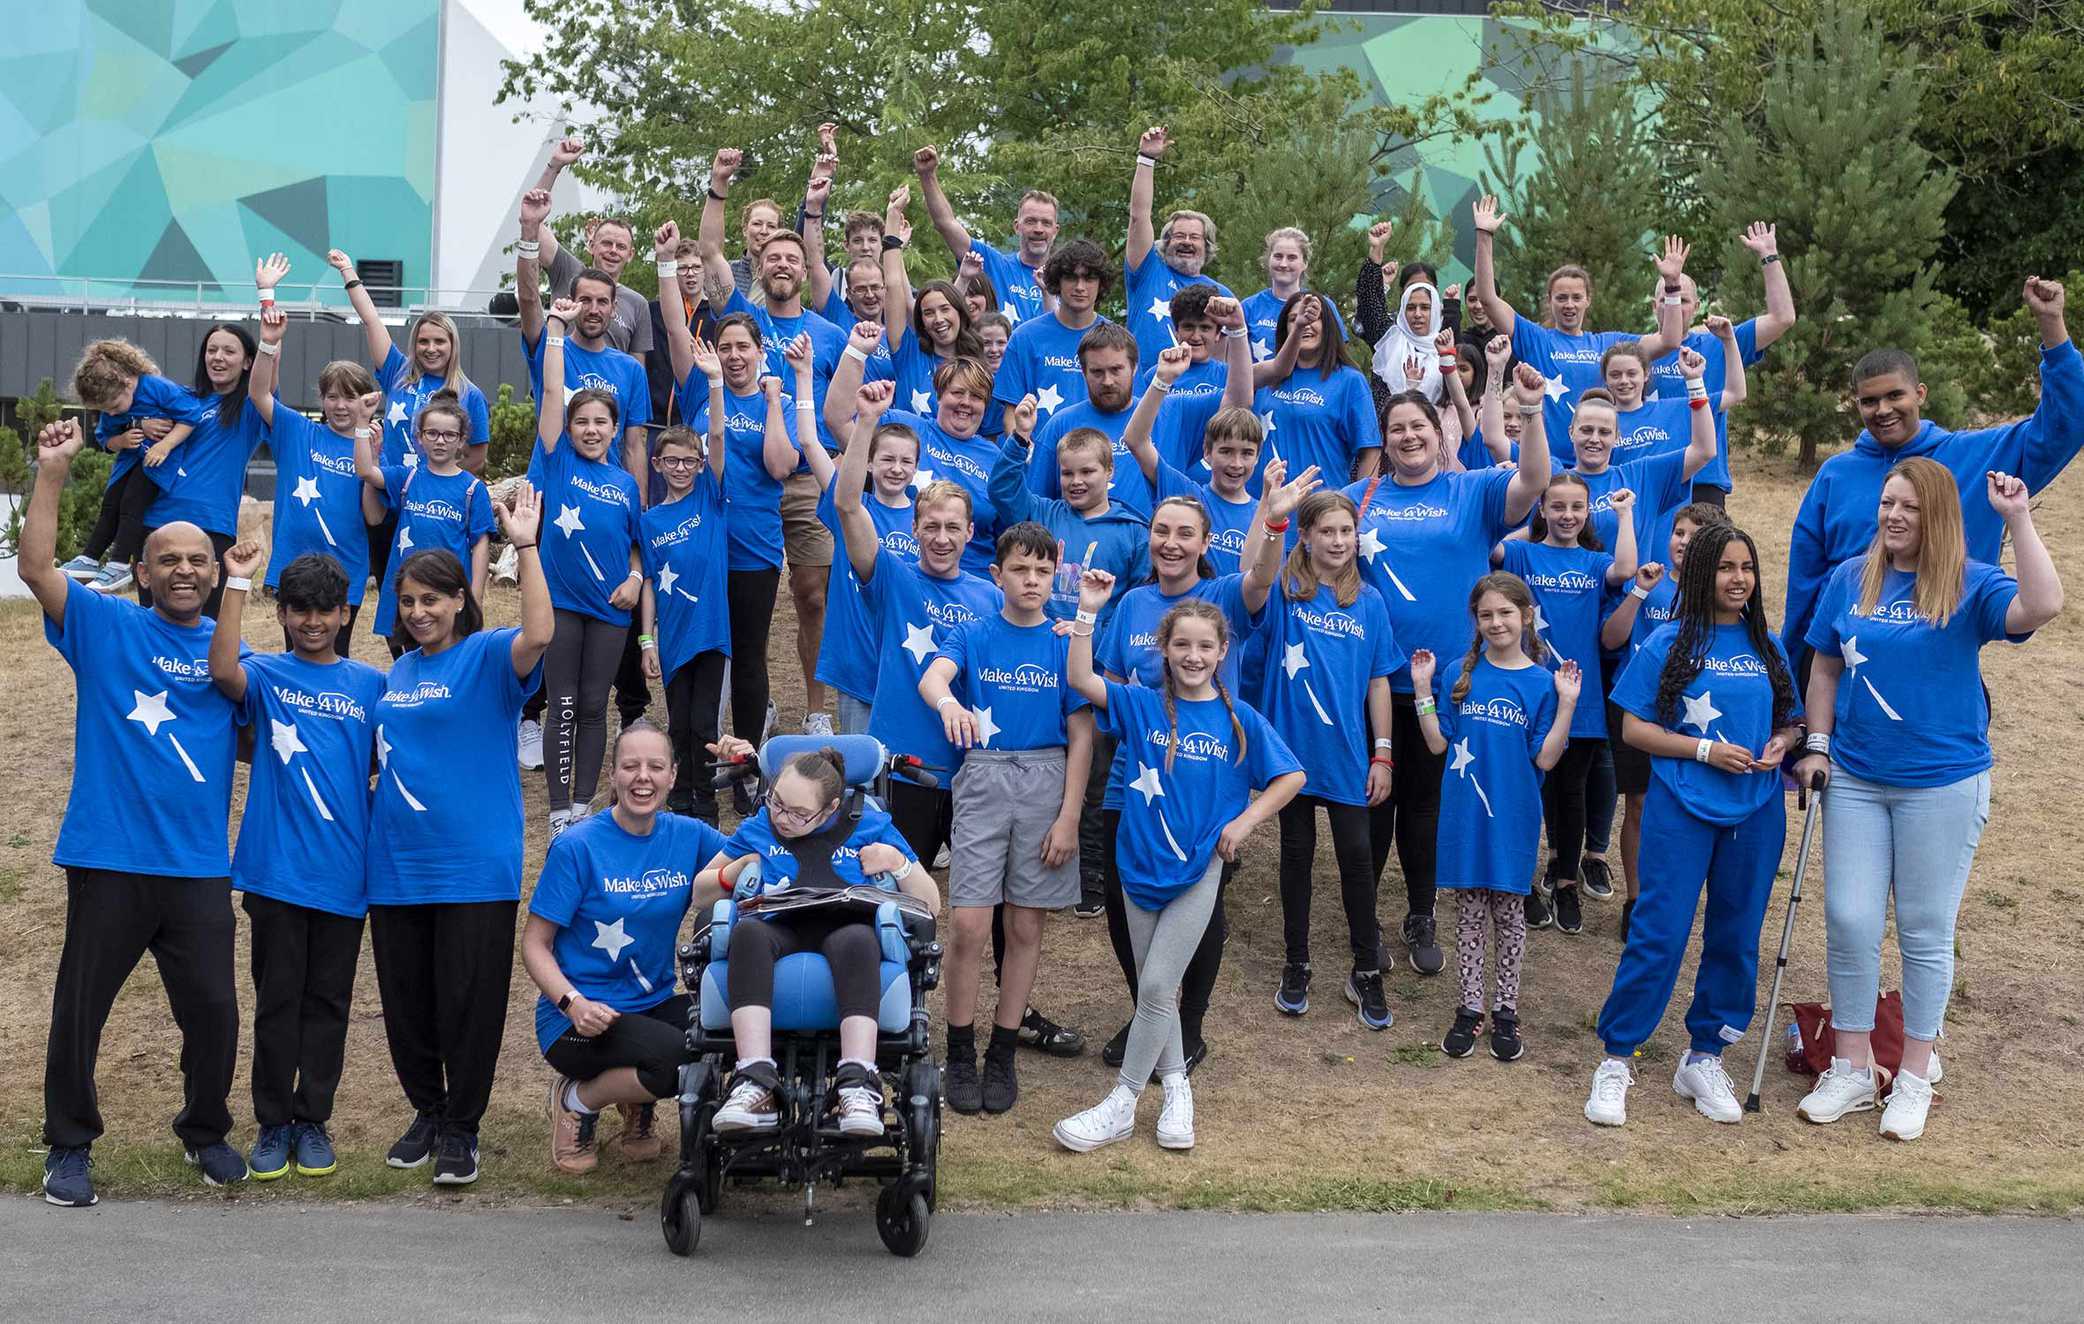 A group photo of the families, staff and volunteers that attended the Wish Alumni event at Bear Grylls Adventure Park.